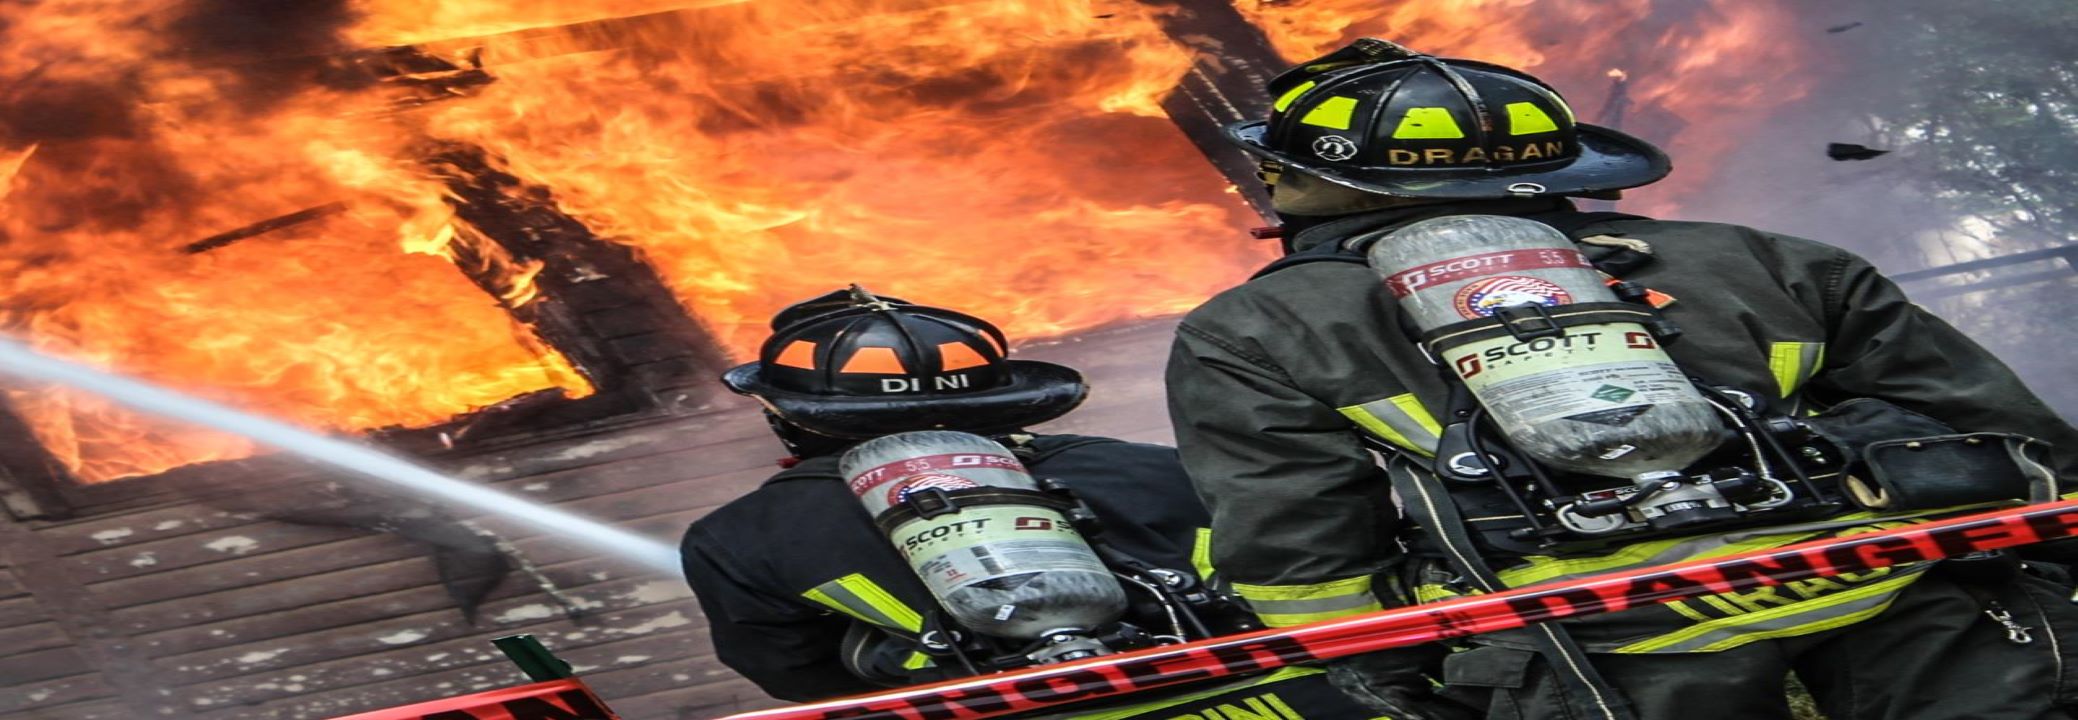 Fire 2-Way Radios and Accessories